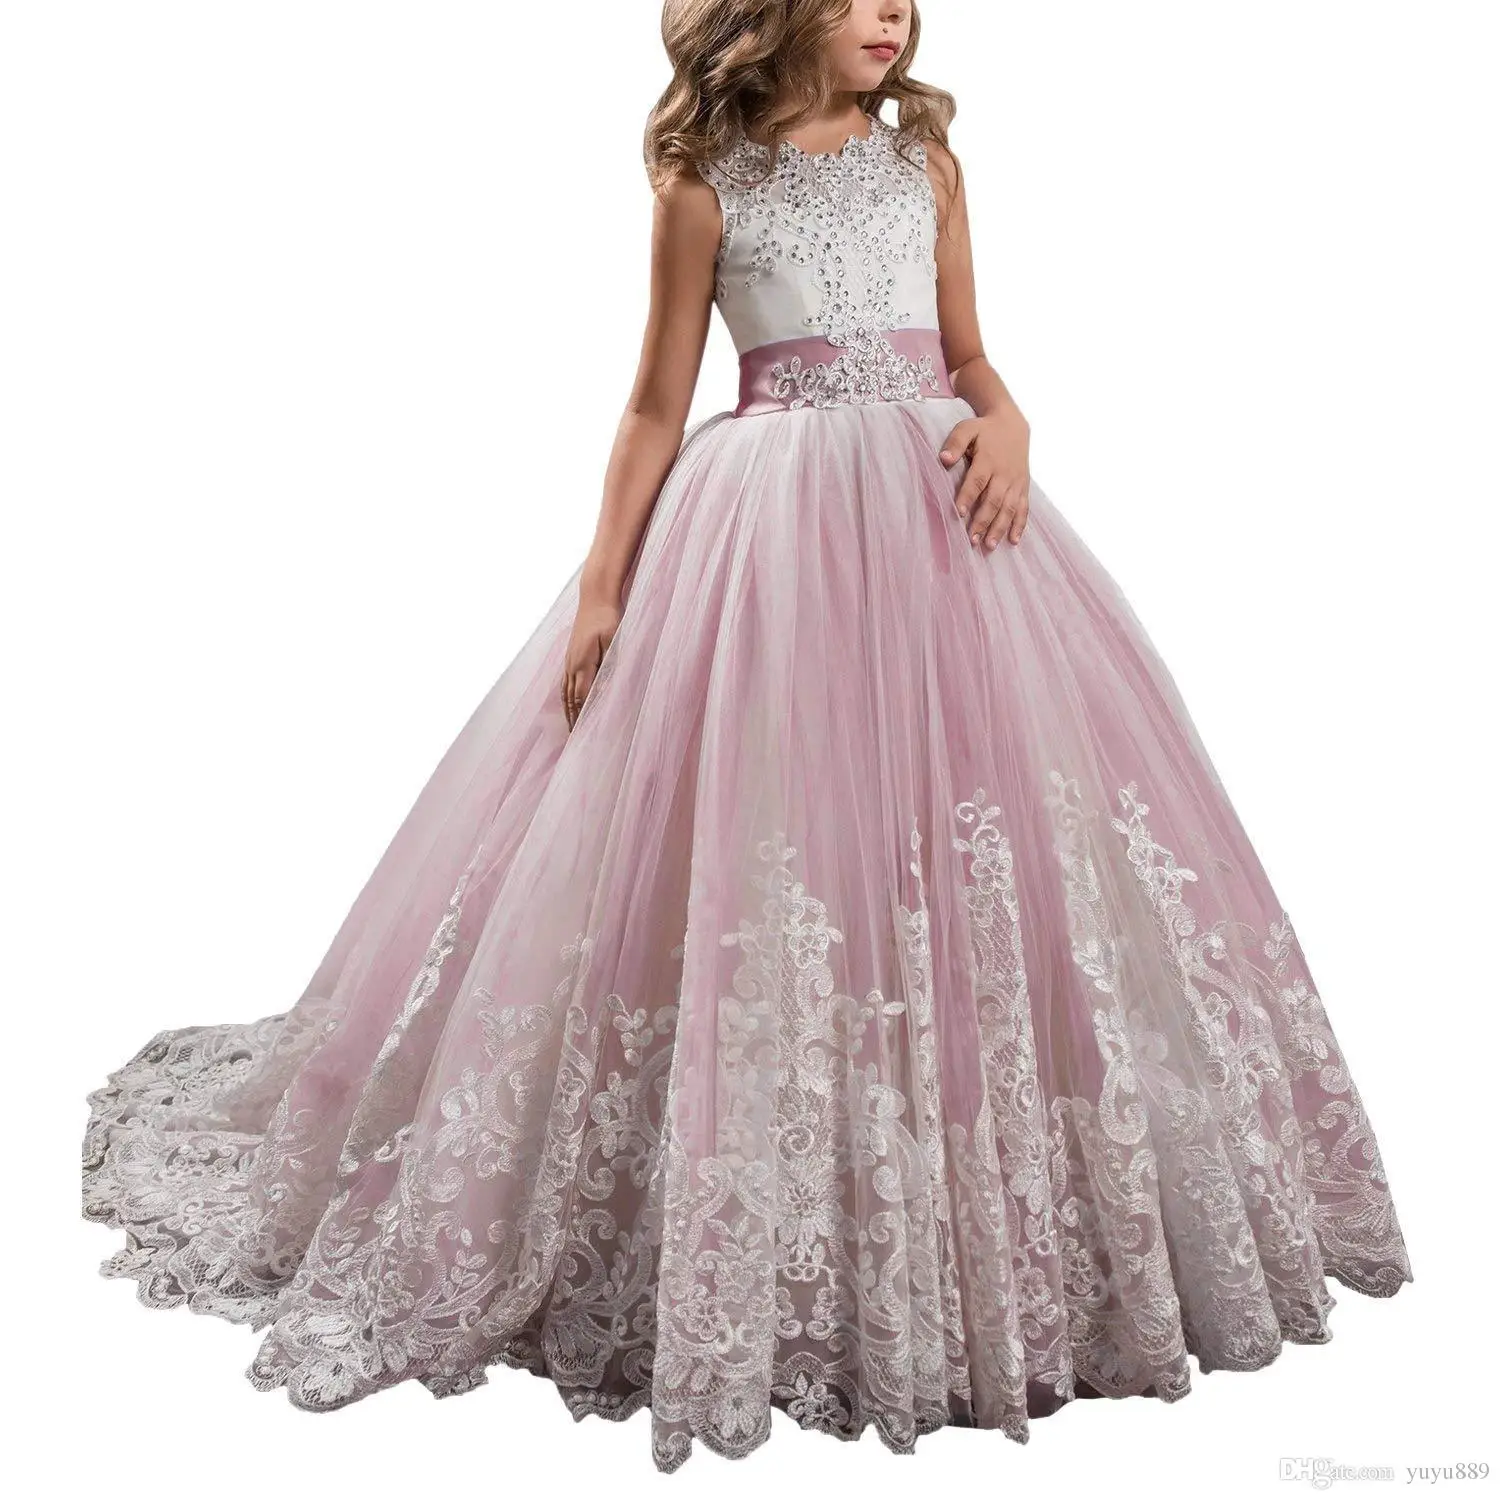 

New Arrival Lace Ball Gown Flower Girl Dresses For Weddings Appliques Little Girls Pageant Dress Short Sleeves Pearls First Comm